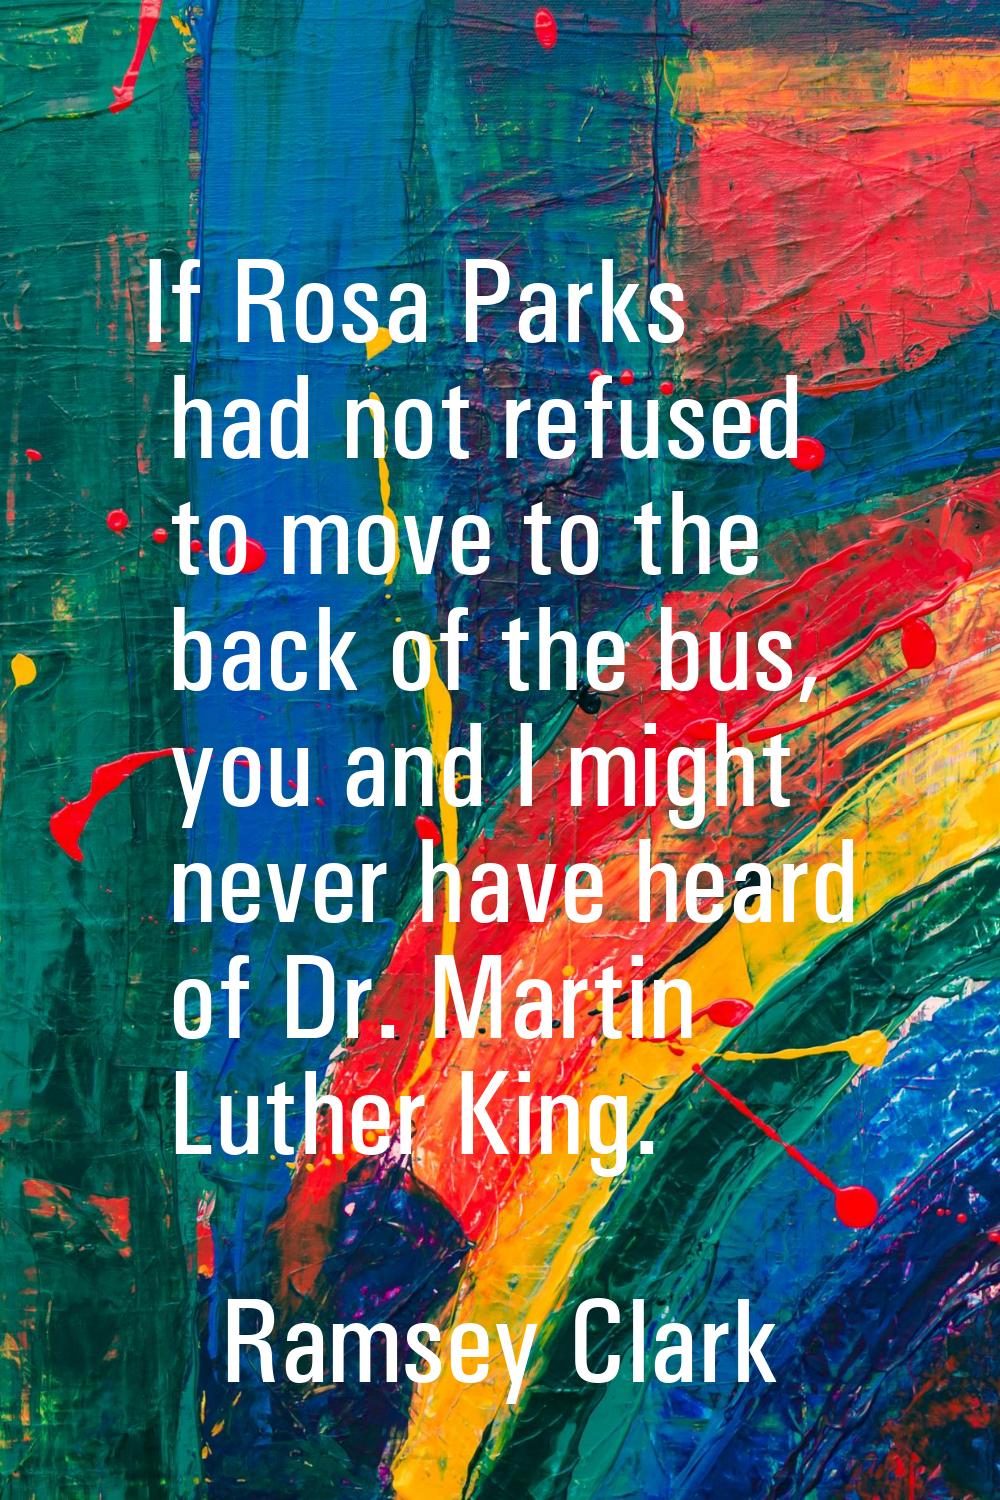 If Rosa Parks had not refused to move to the back of the bus, you and I might never have heard of D